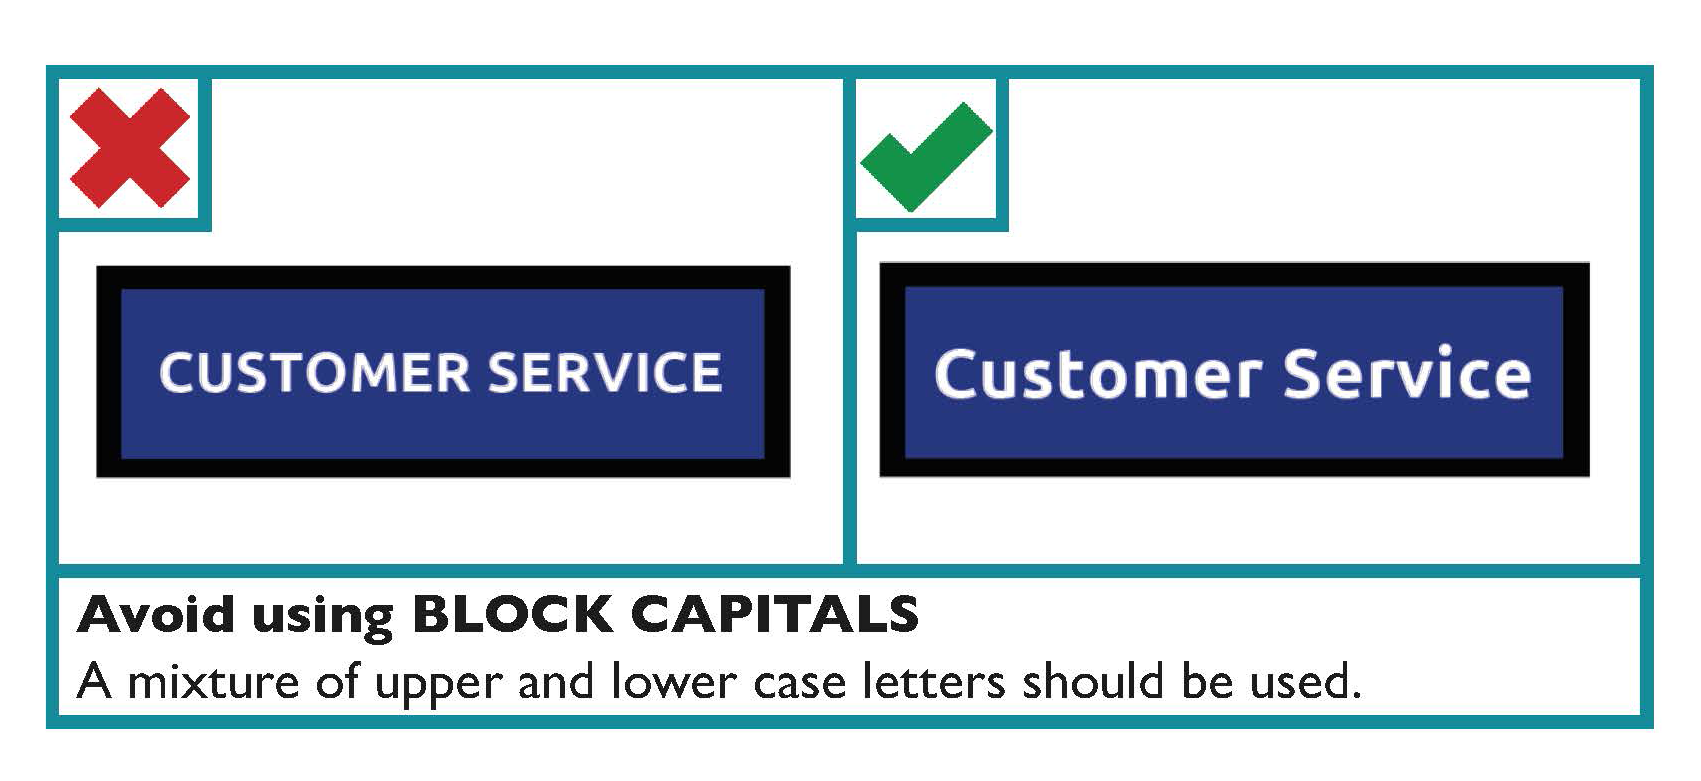 Avoid using block capitals. A mixture of upper and lower case letters should be used.